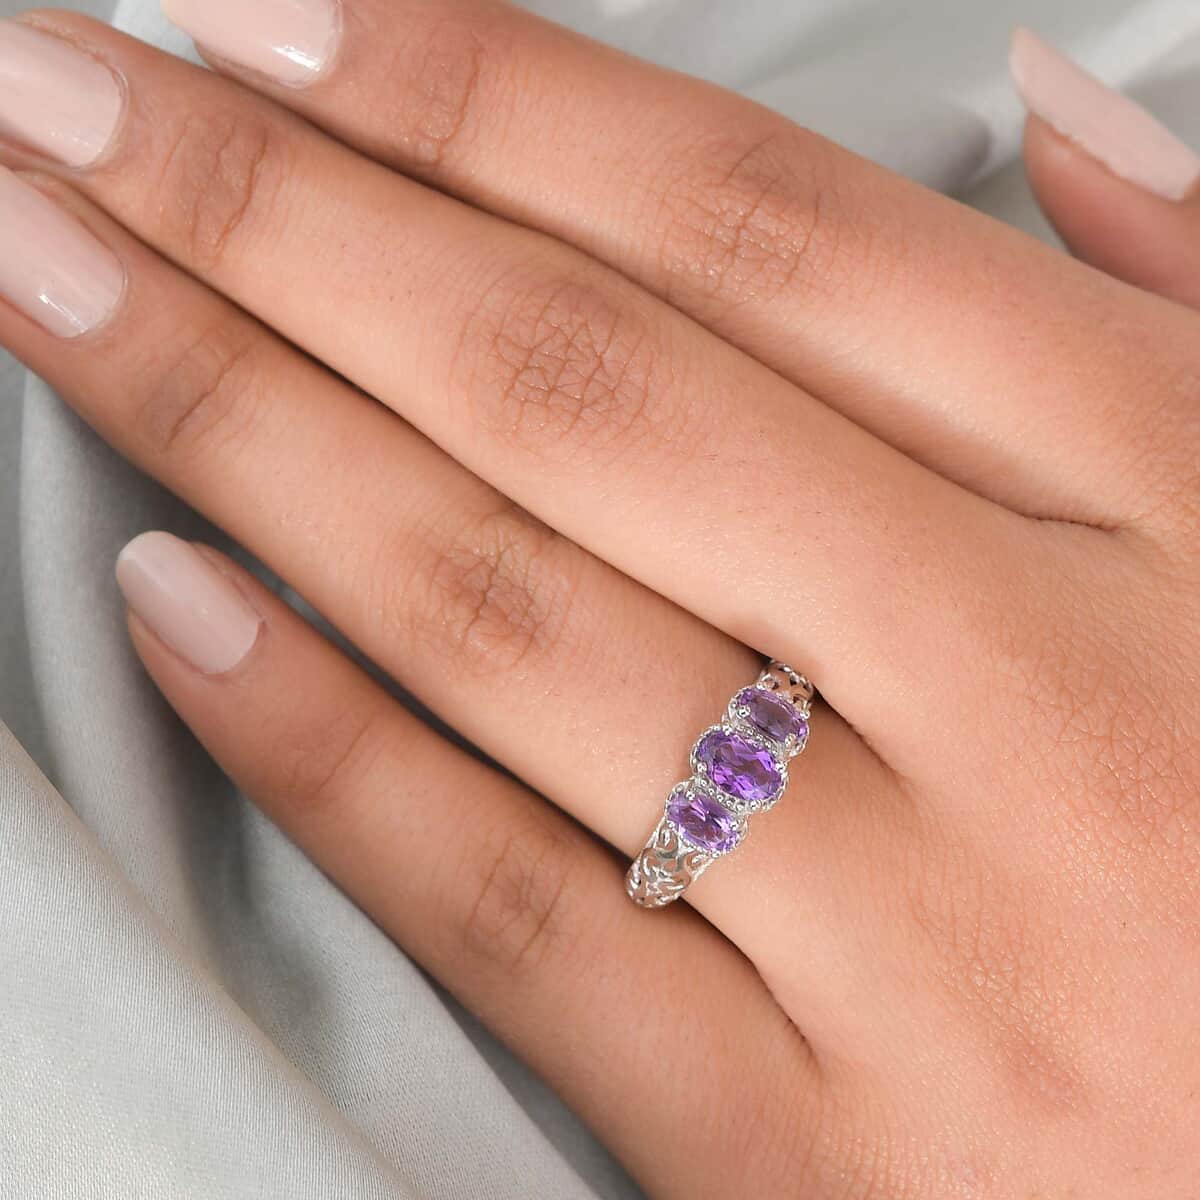 Amethyst Ring, 3 Stone Amethyst Ring, Trilogy Ring, Sterling Silver Ring, Birthstone Jewelry, Amethyst 3 Stone Ring 0.85 ctw (Size 10.0) image number 1